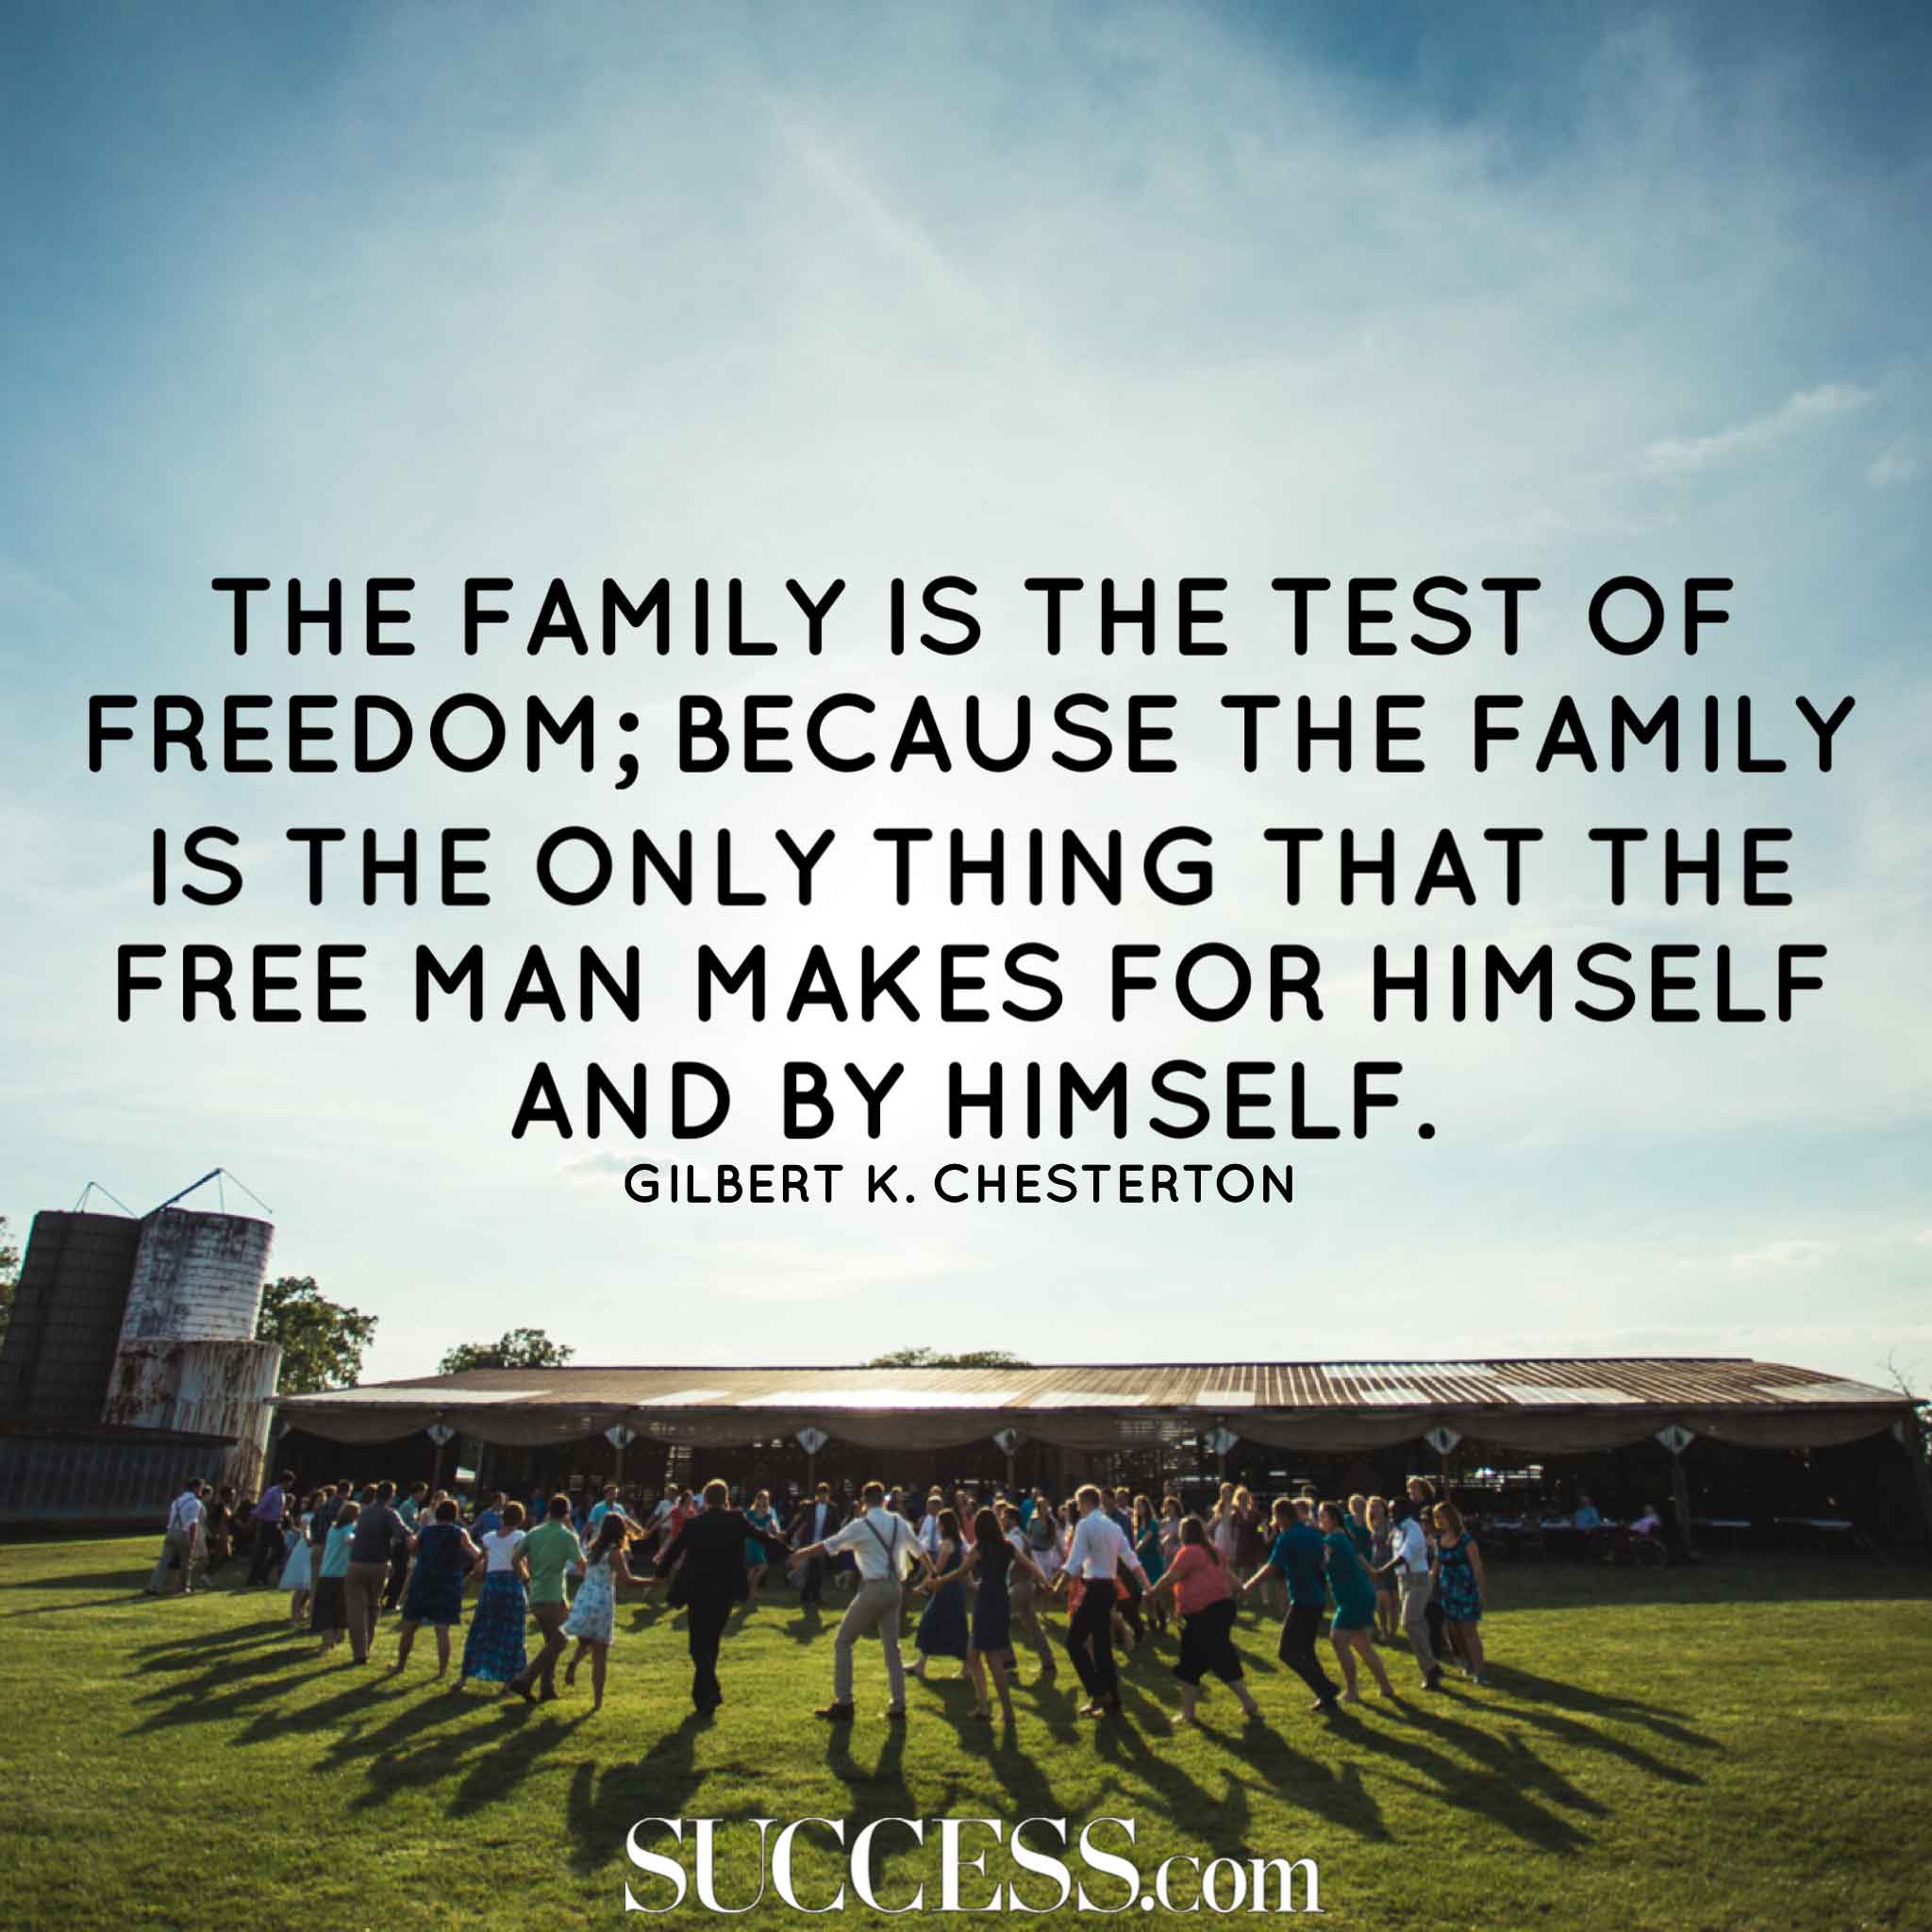 The family is the test of freedom; because the family is the only thing that the free man makes for himself and by himself. Gilbert K. Chesterton